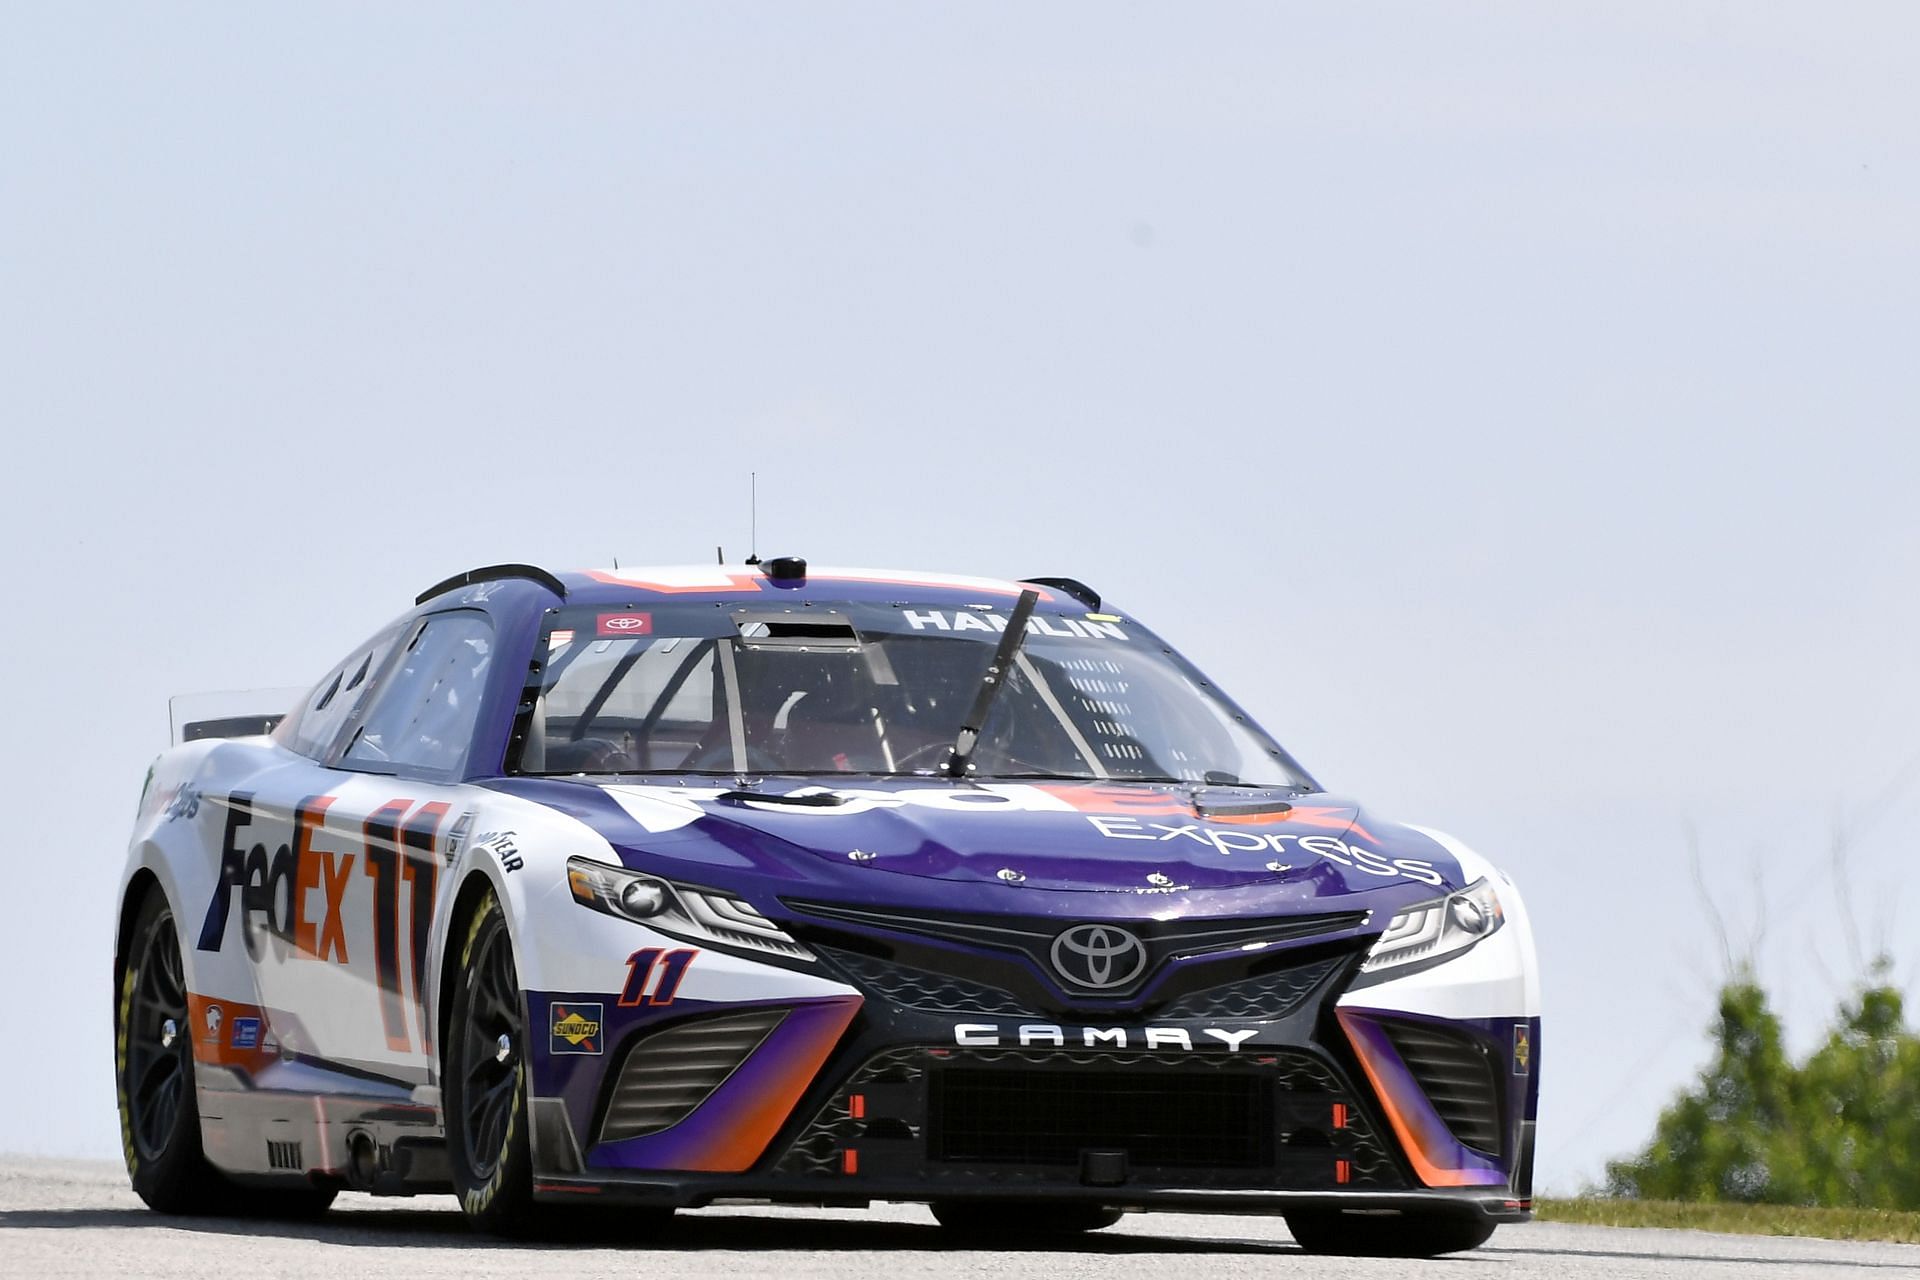 Denny Hamlin drives during qualifying for the 2022 NASCAR Cup Series Kwik Trip 250 at Road America in Elkhart Lake, Wisconsin (Photo by Logan Riely/Getty Images)